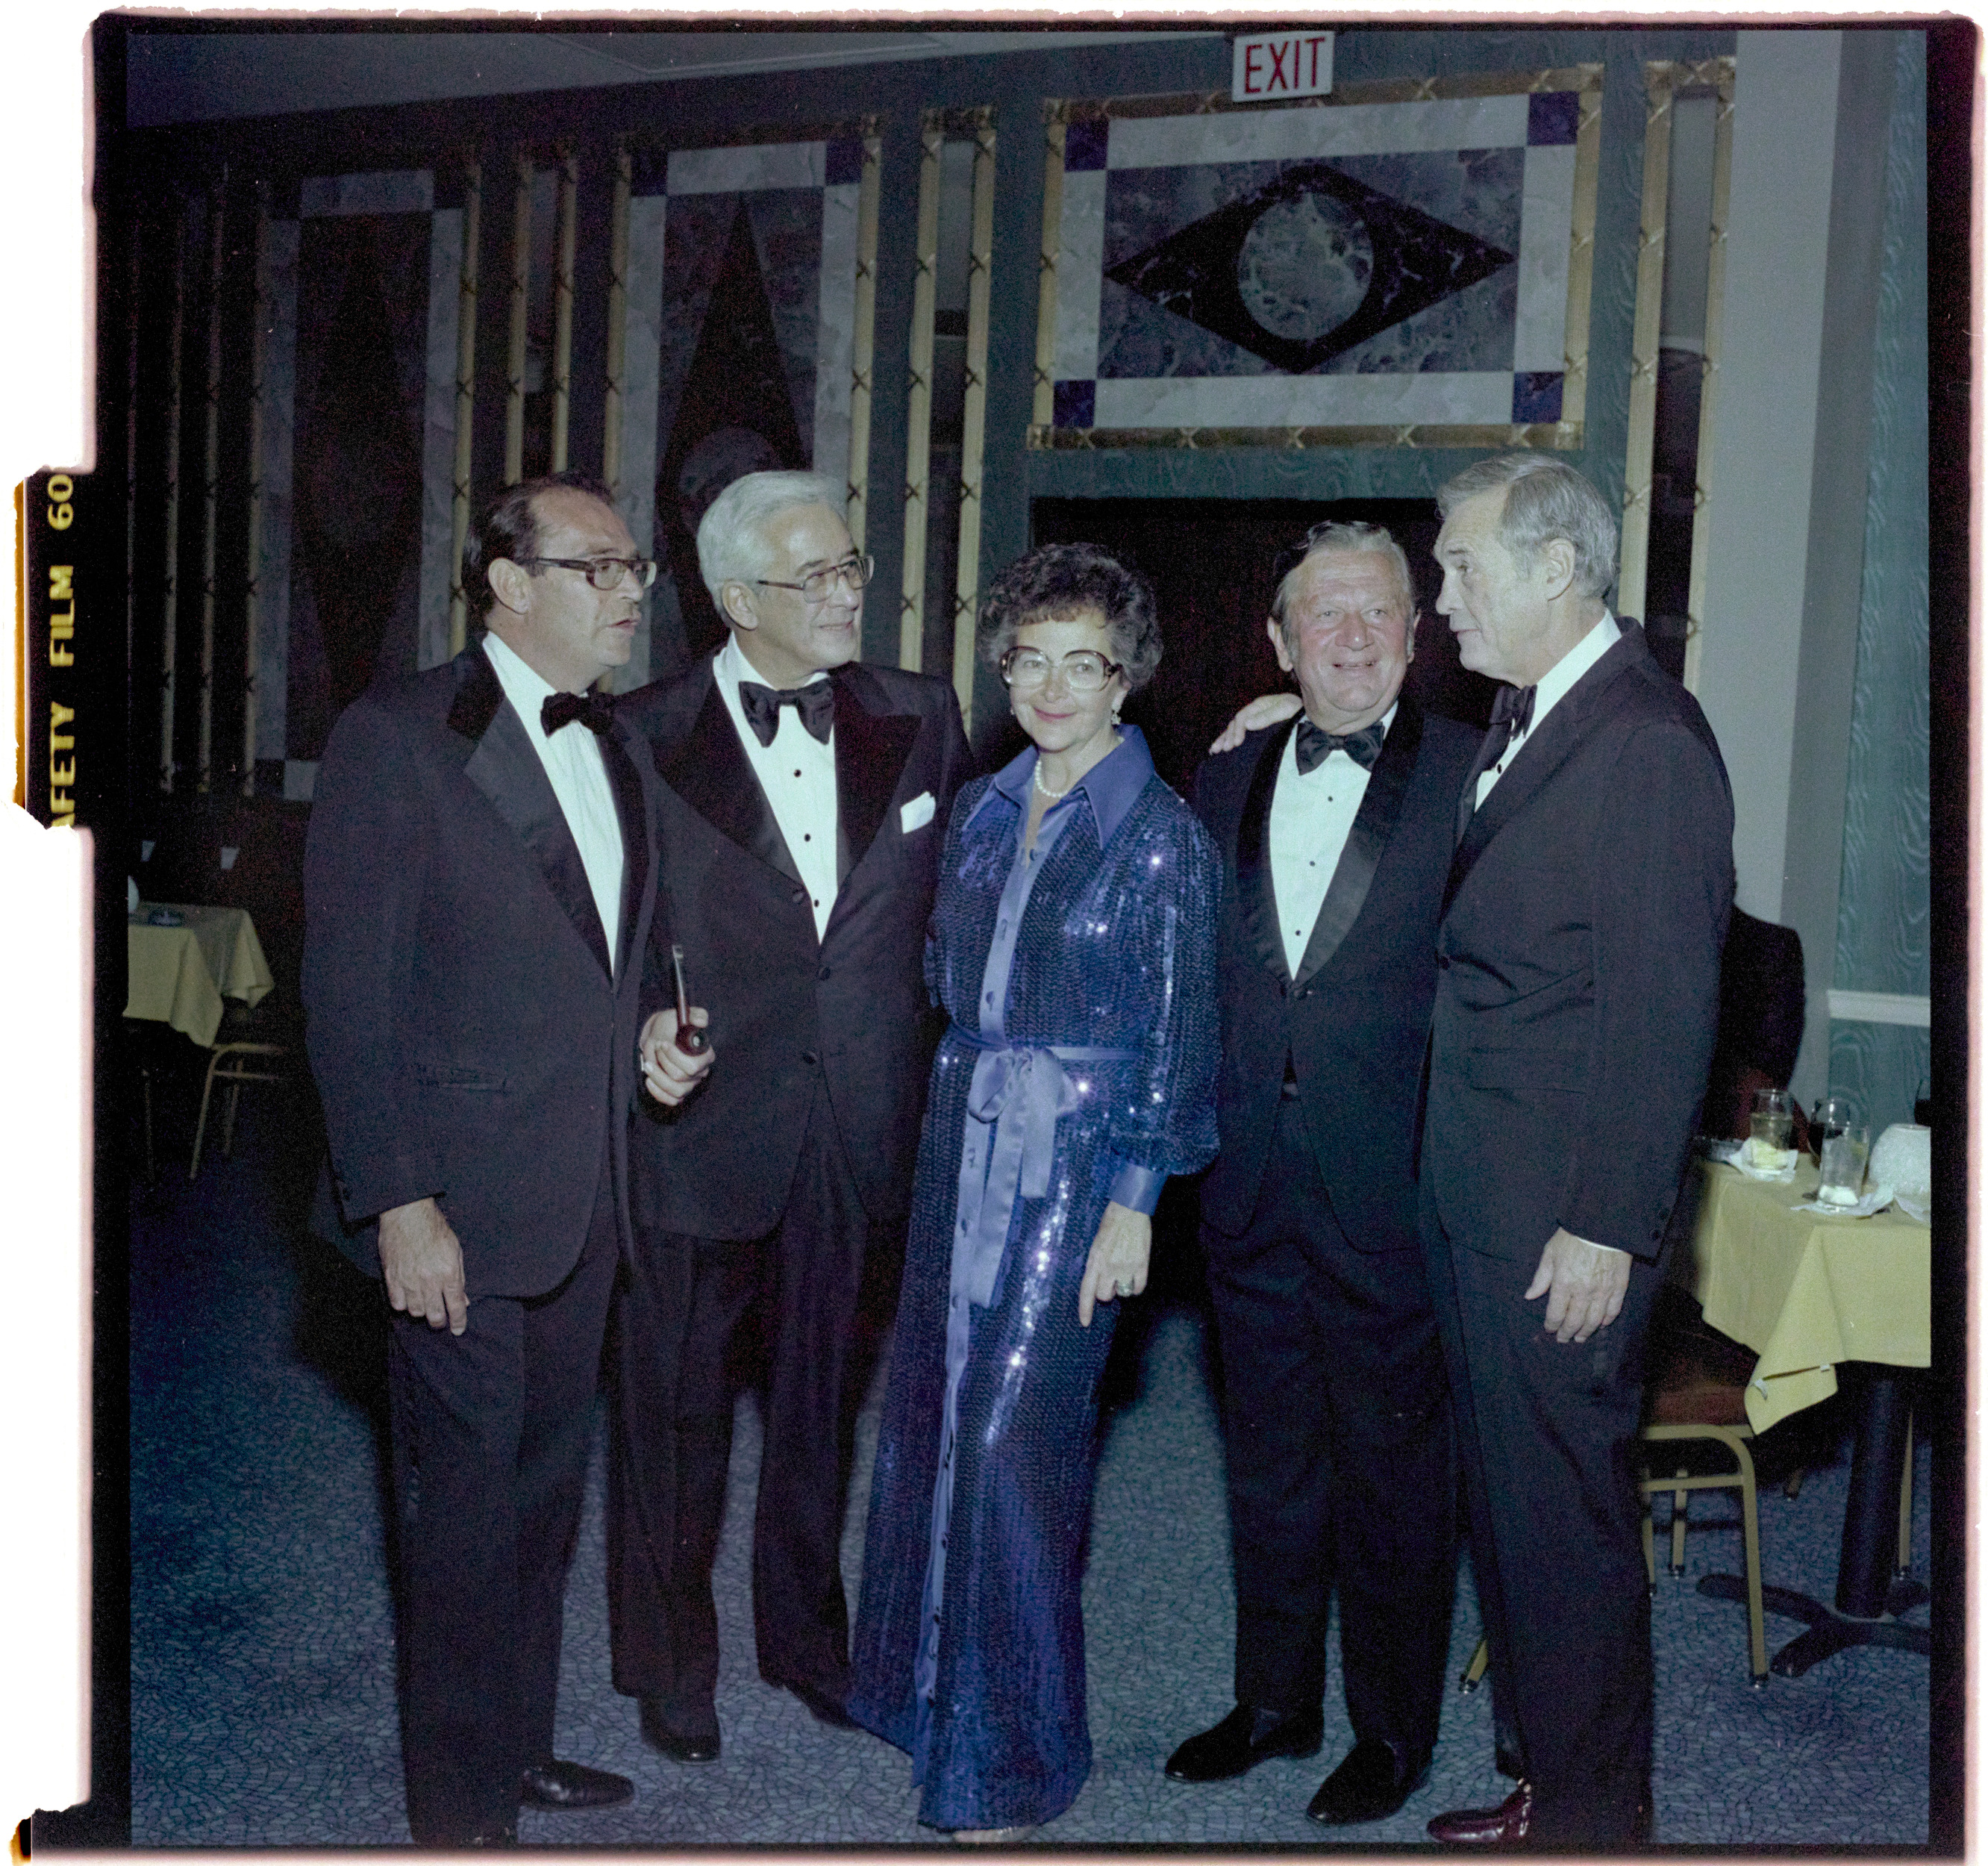 Photographs of Combined Jewish Appeal (Israel Bonds Dinner), image 06